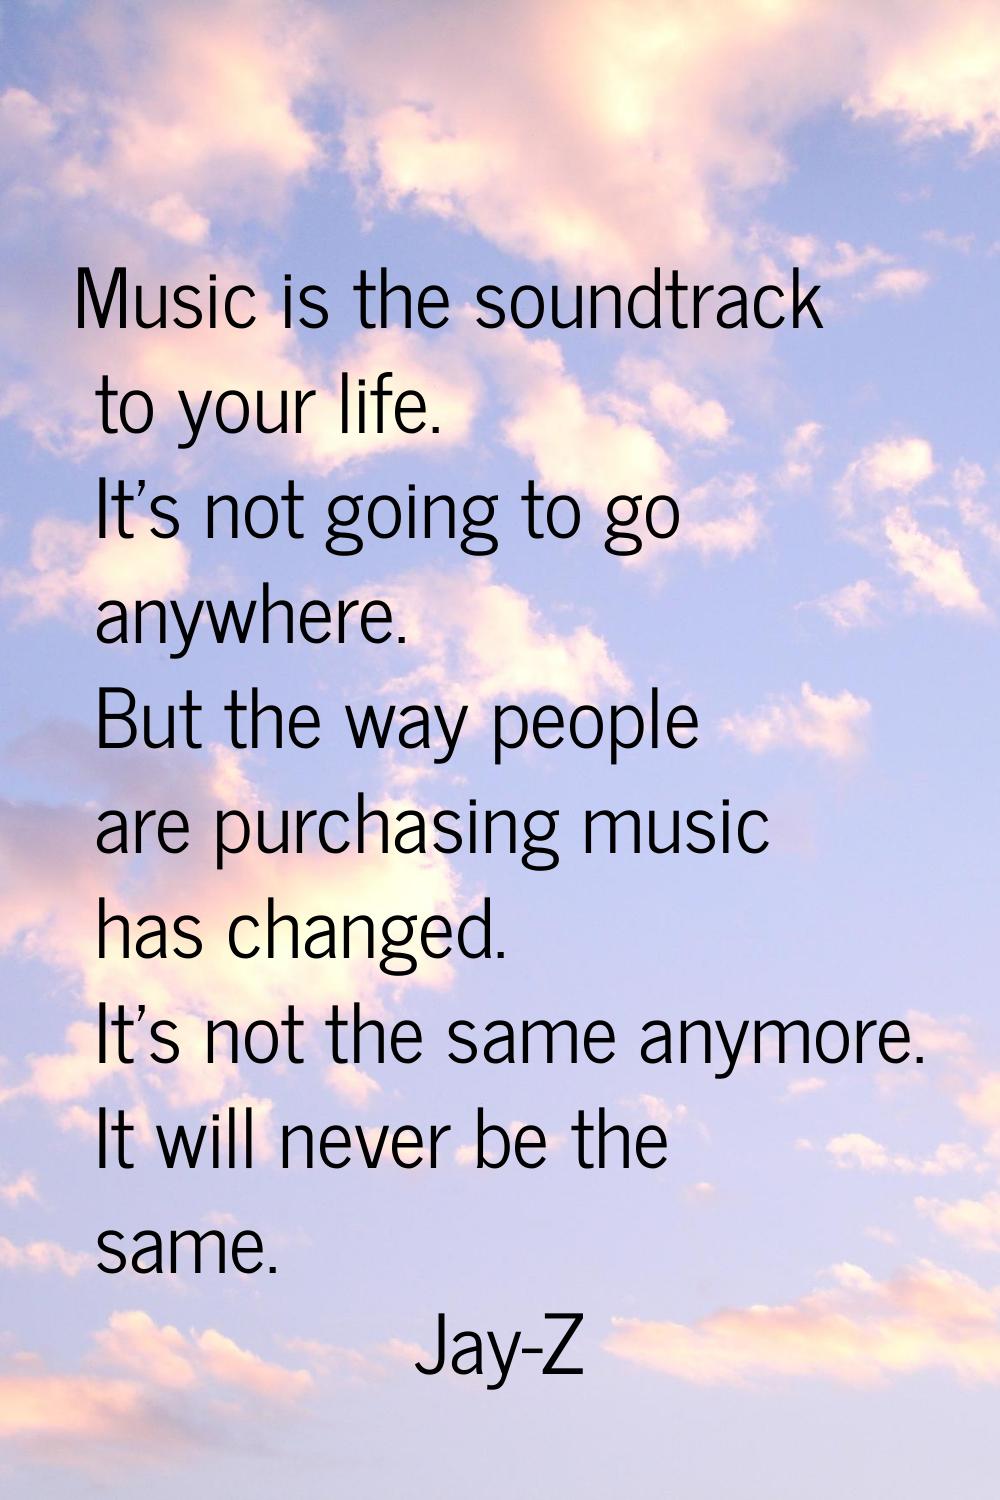 Music is the soundtrack to your life. It's not going to go anywhere. But the way people are purchas